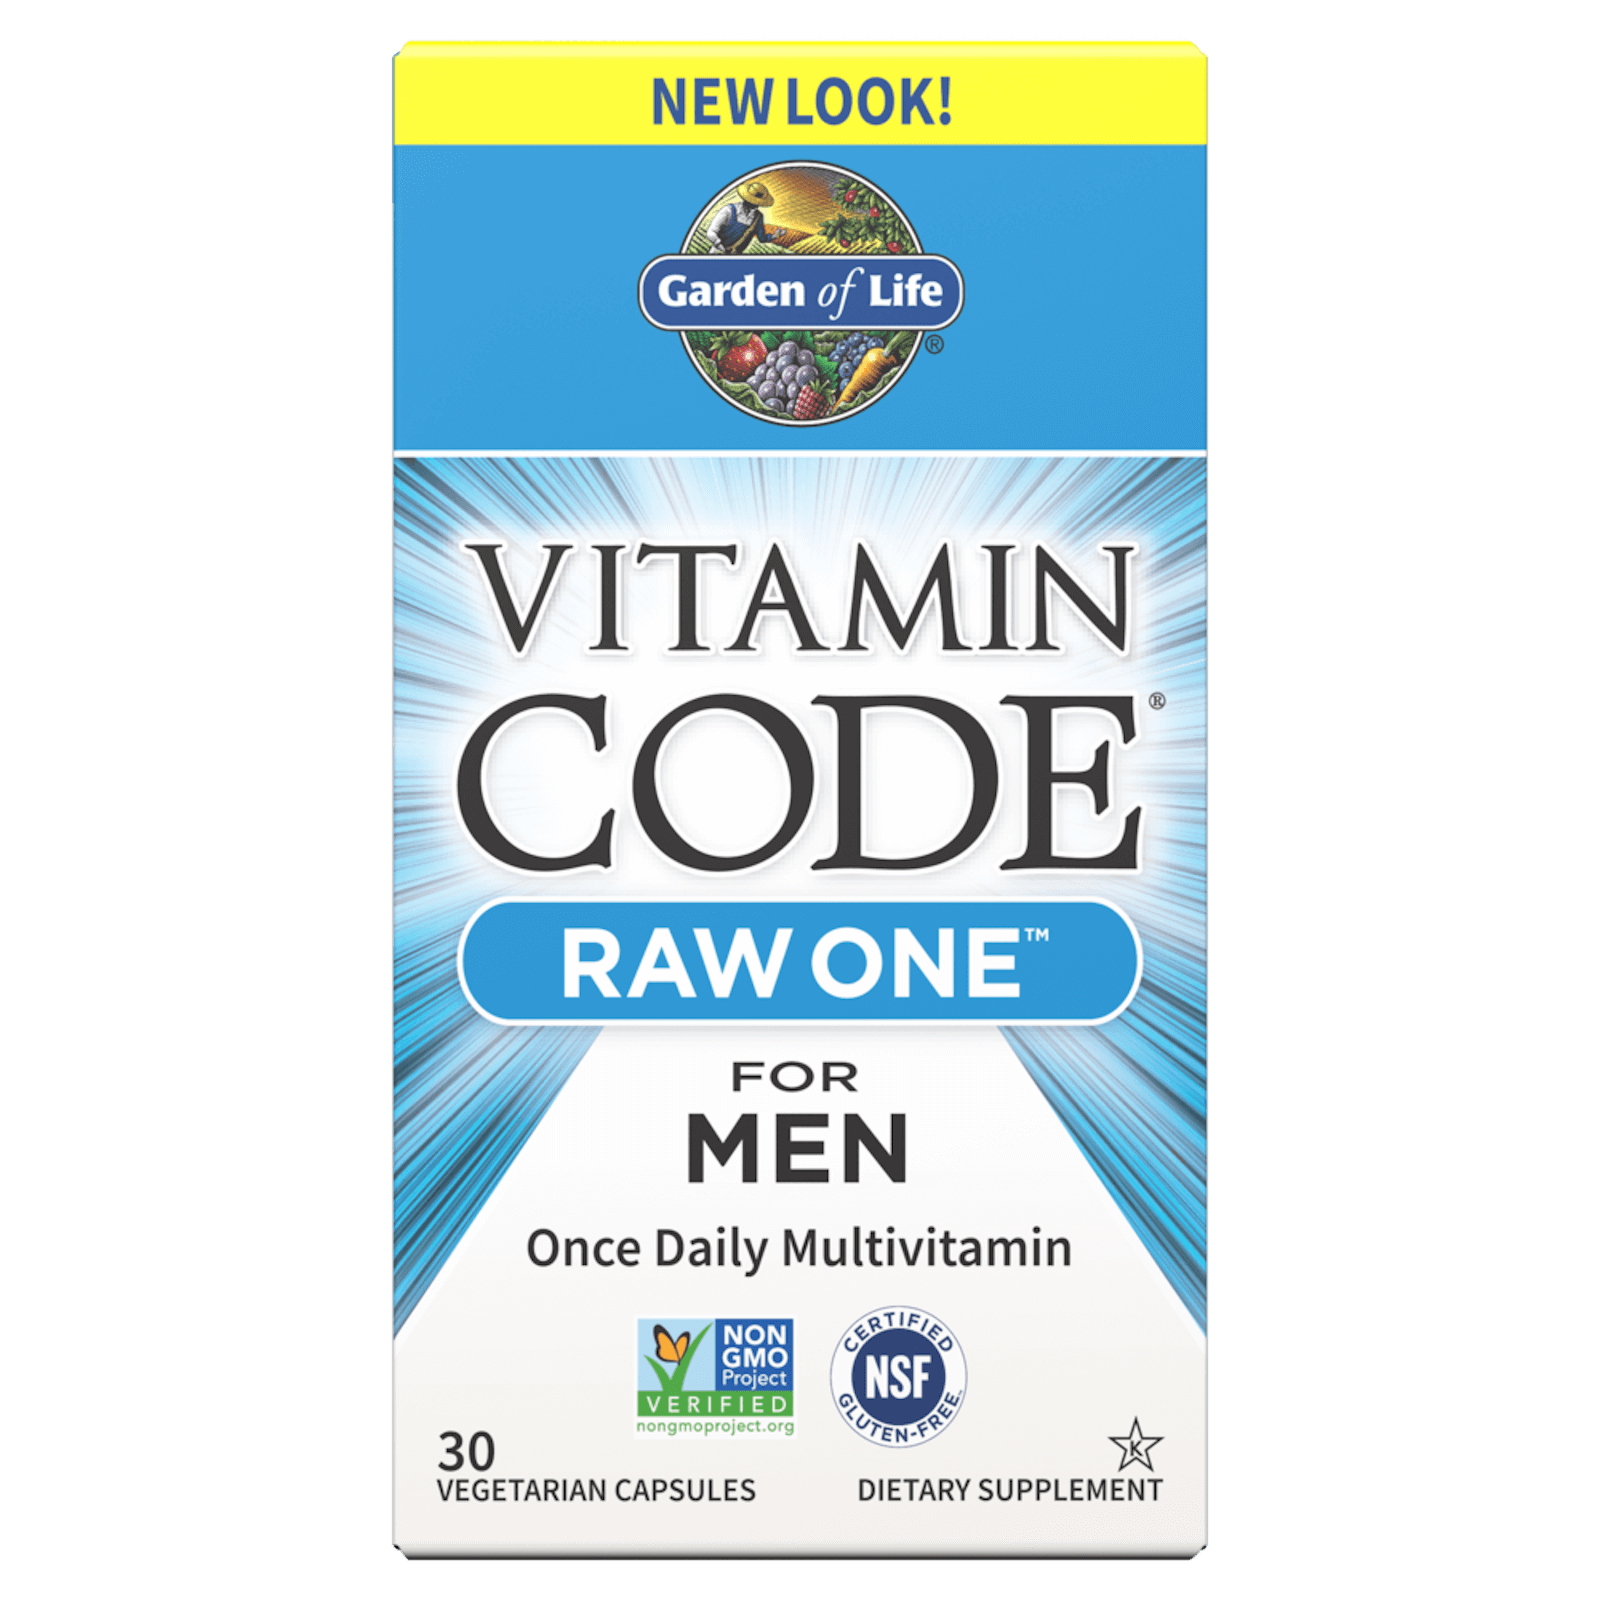 Garden of Life Vitamin Code Raw One For Men 30ct Capsules